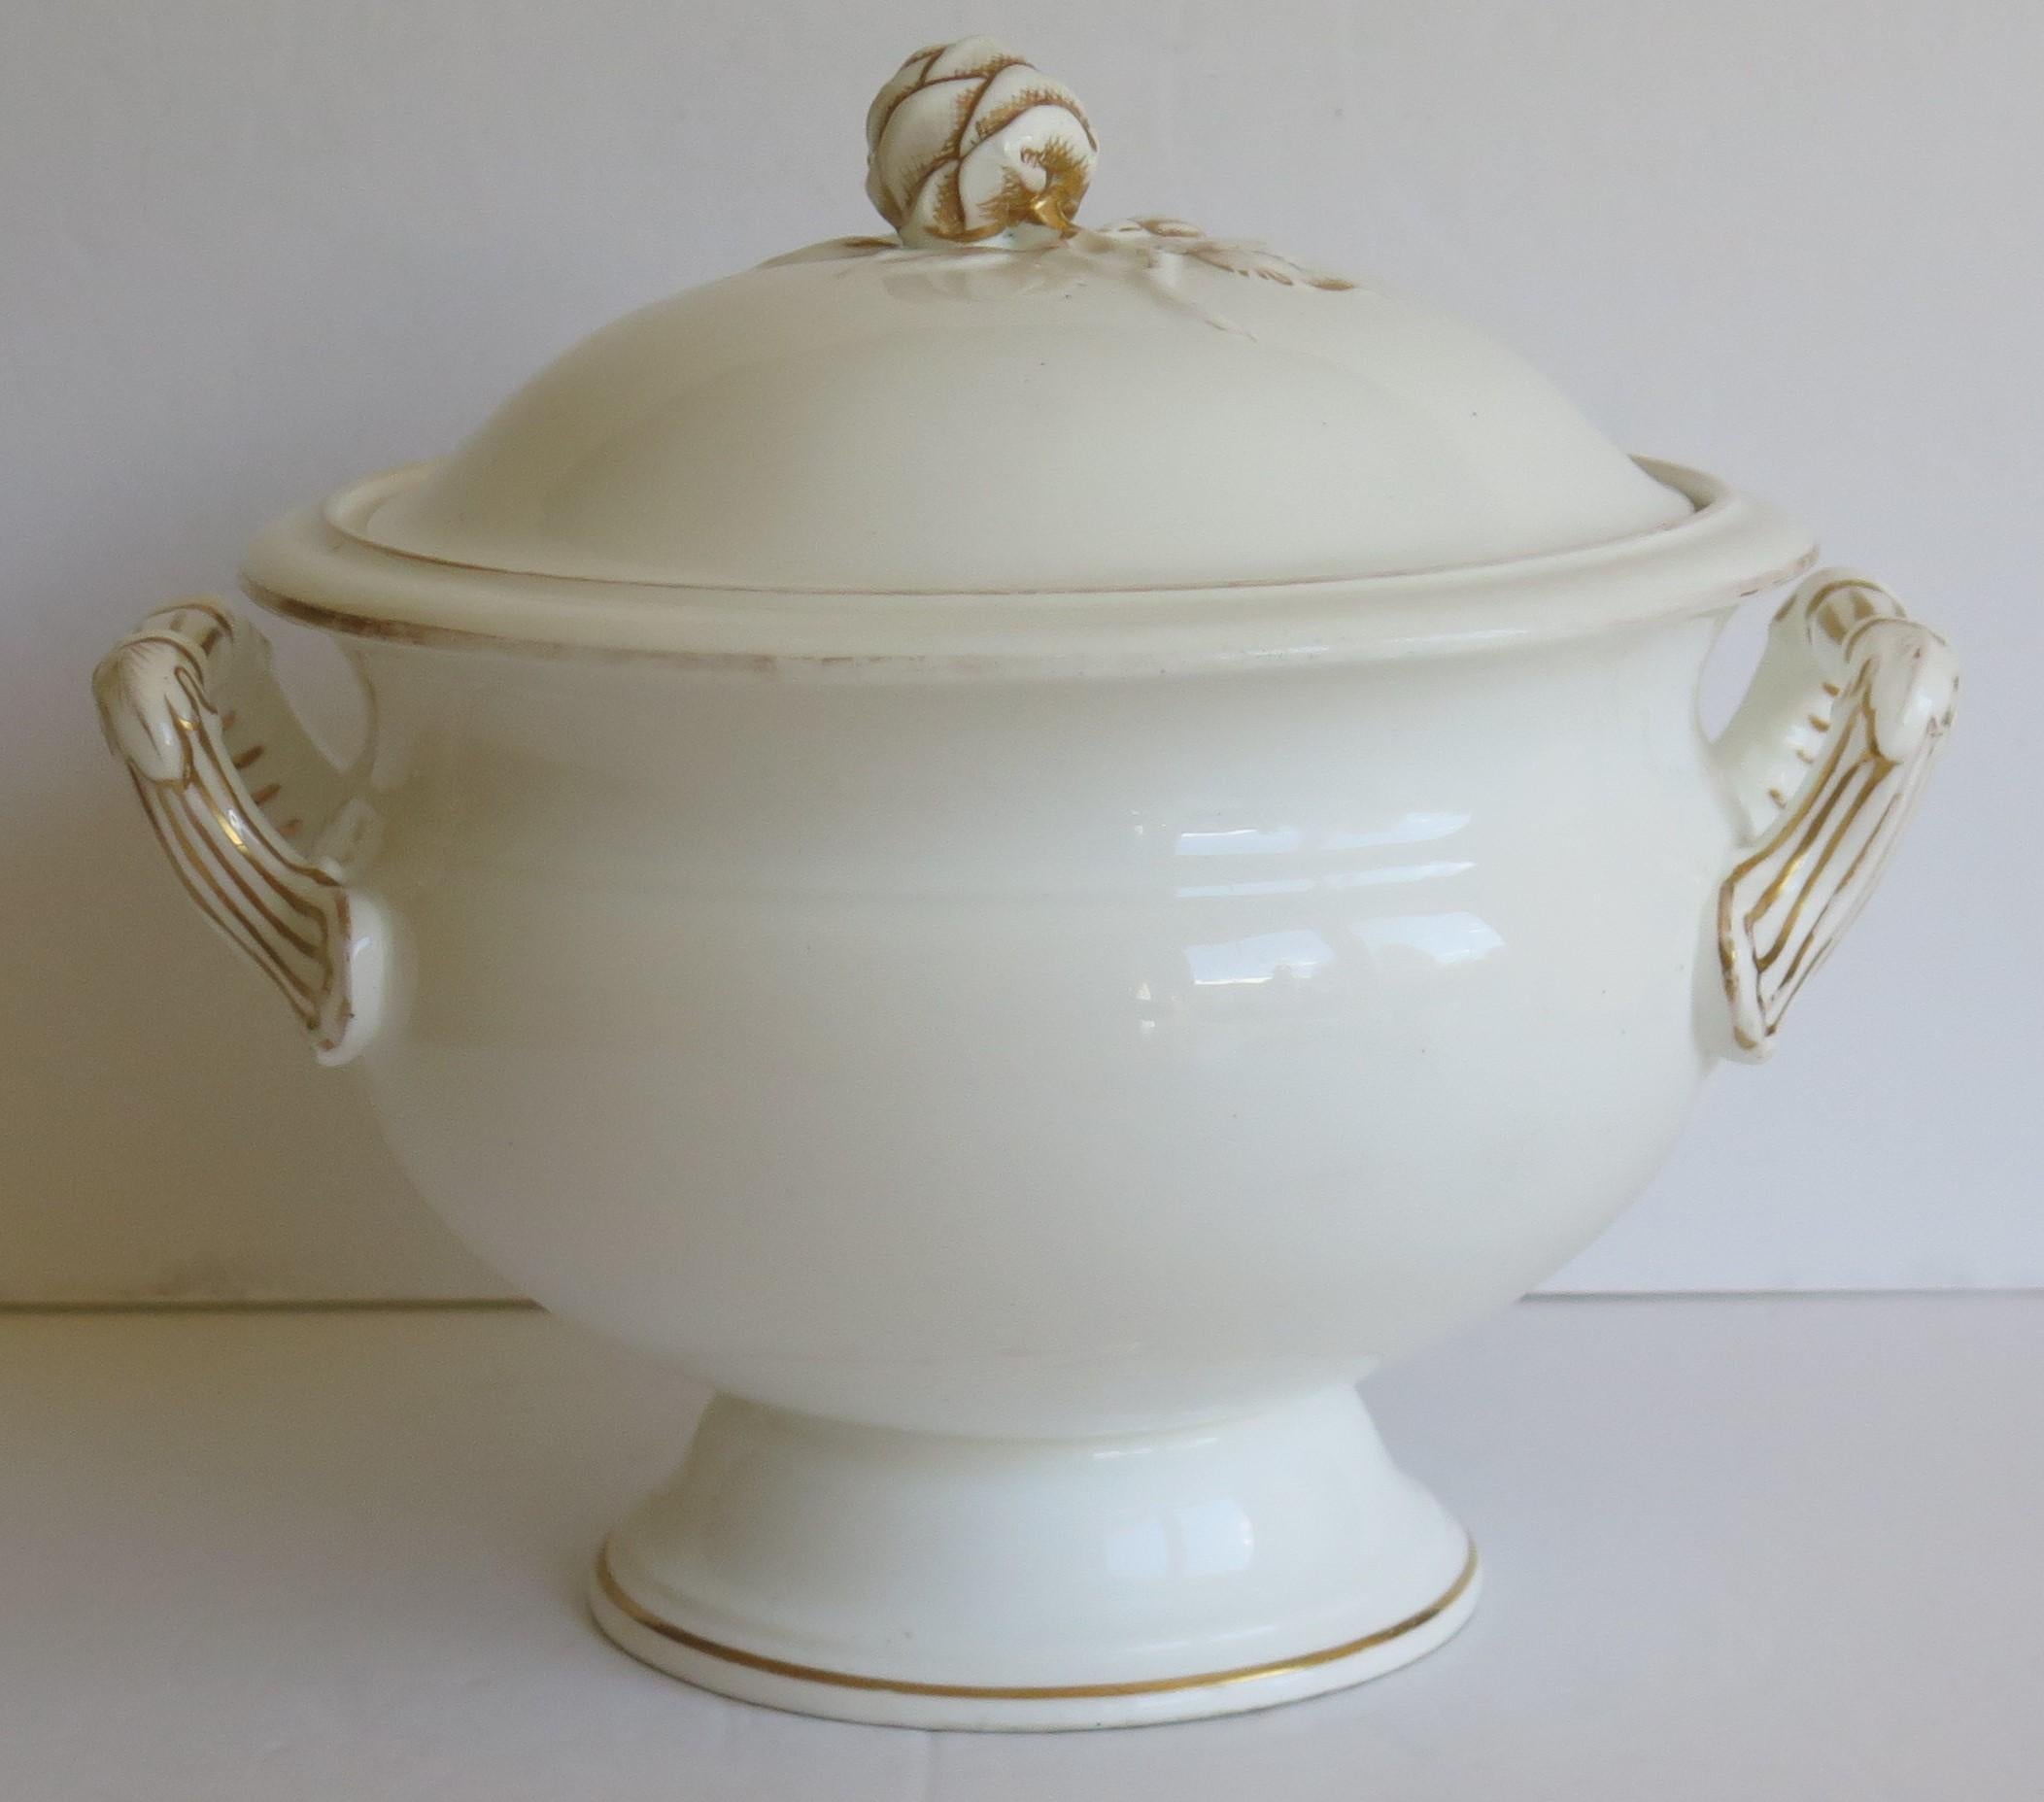 Large 19th Century Porcelain Tureen Gilded Moulded Handles & Rose Knop to Lid For Sale 1